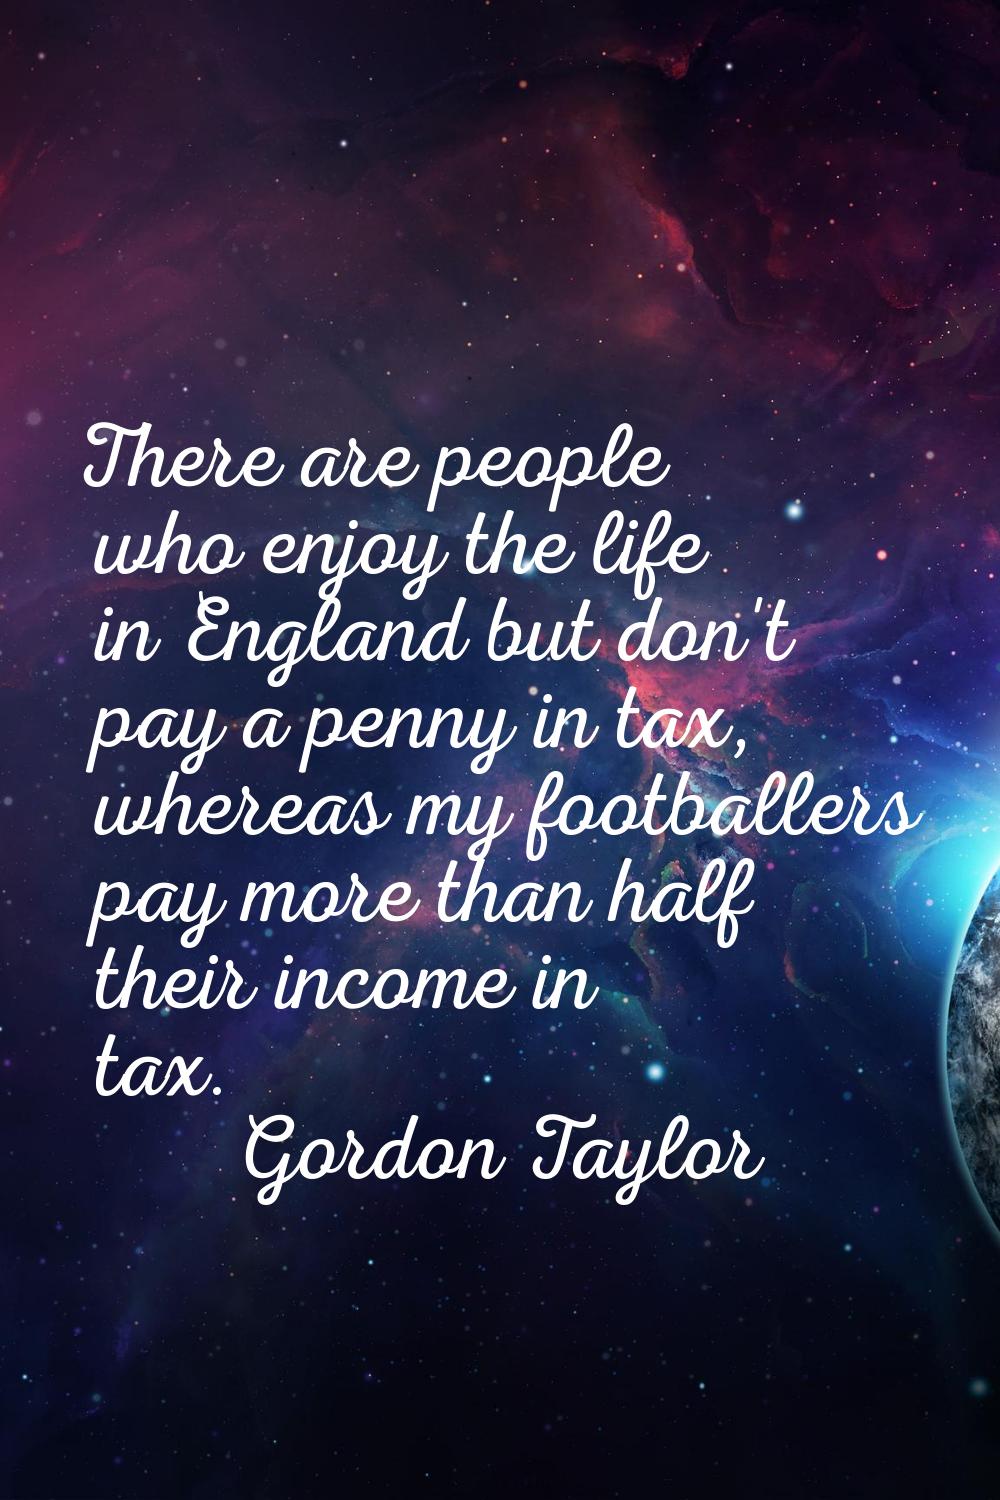 There are people who enjoy the life in England but don't pay a penny in tax, whereas my footballers